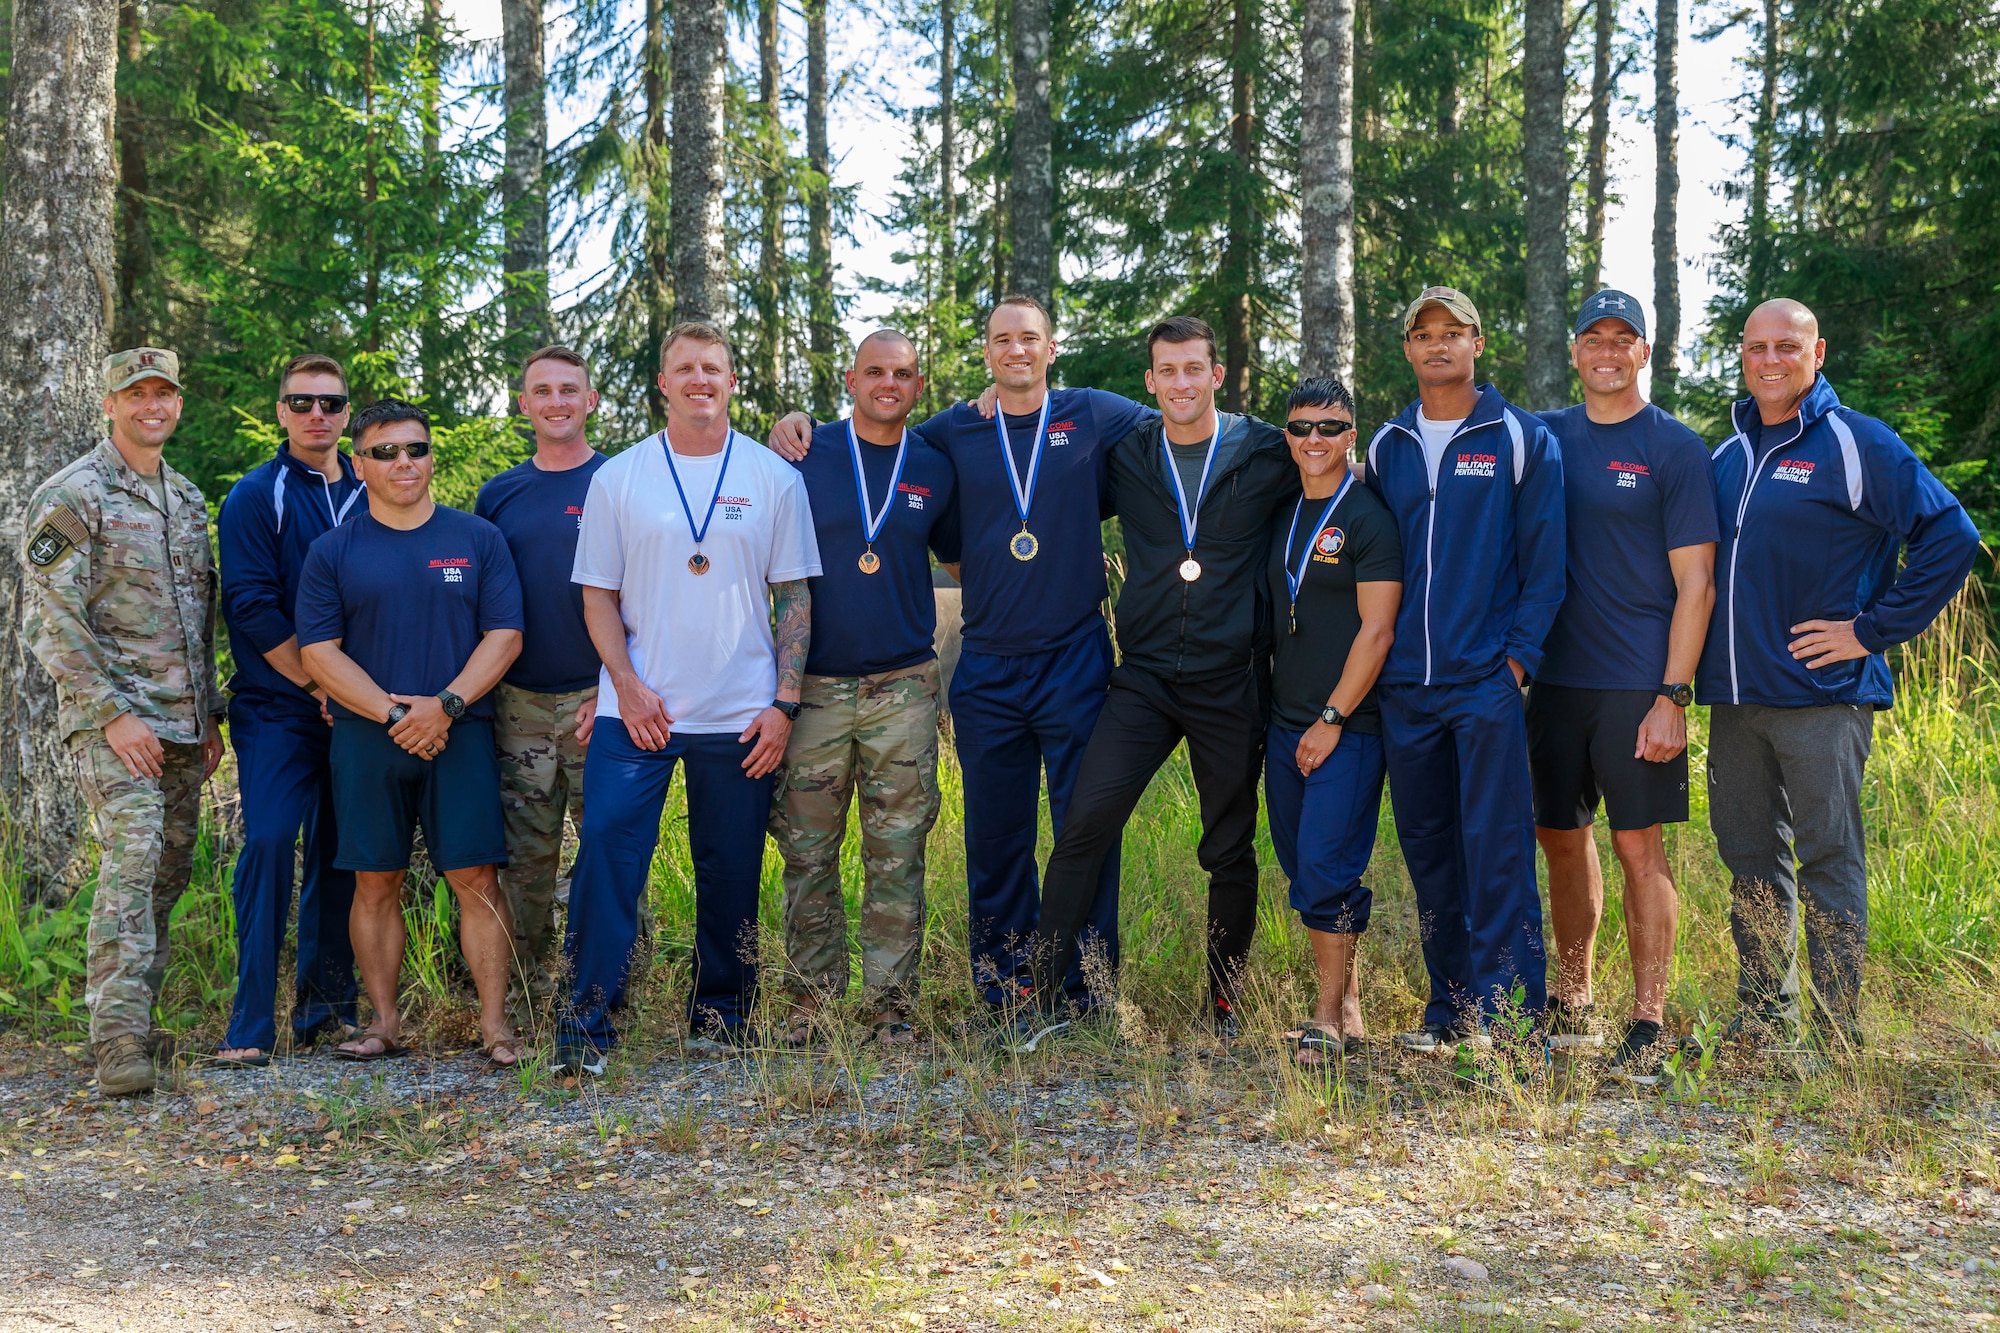 Team USA poses for a picture after the the closing ceremony in Lahti, Finland on August 1st. This team was composed of reserve service members from three nations, Finland, Denmark and the United States of America. The CIOR MILCOMP is an annual competition among NATO and Partnership for Peace nations. This competition test reserve service members from allied nations on several core disciplines in teams of three.